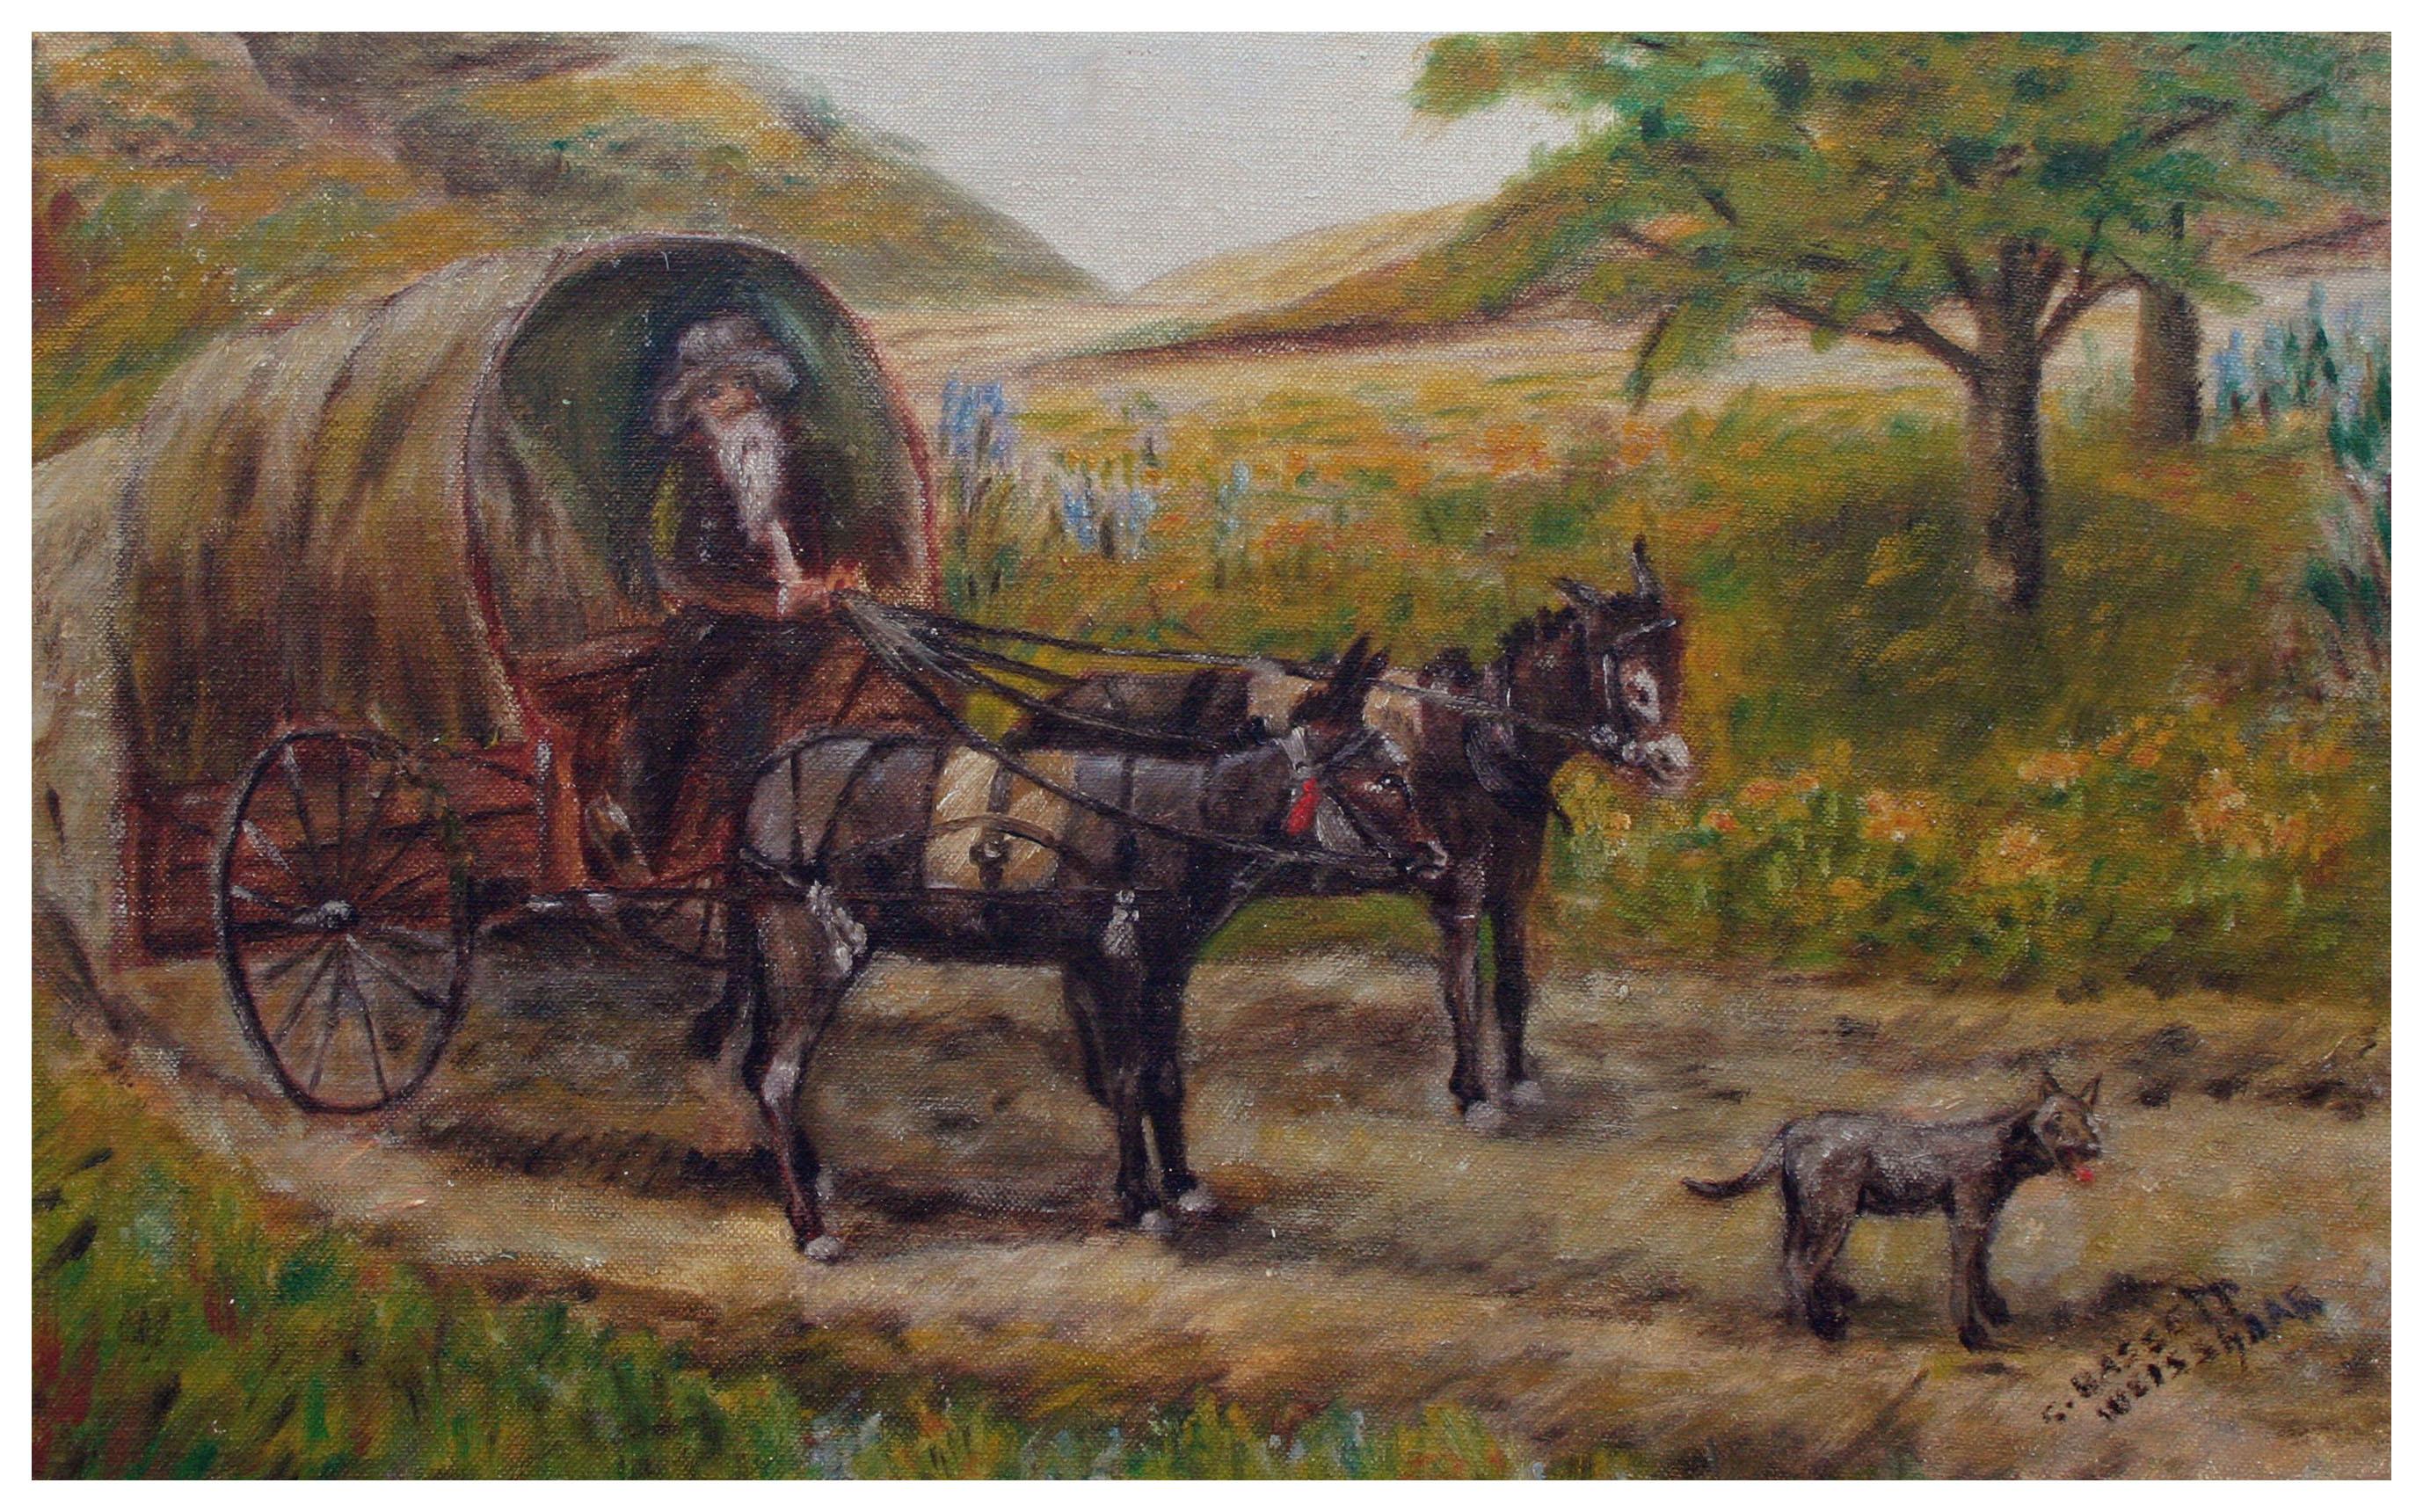 Wagon on the Road, Early 20th Century Landscape with Donkeys  - Painting by S. Bassett Weisshaar